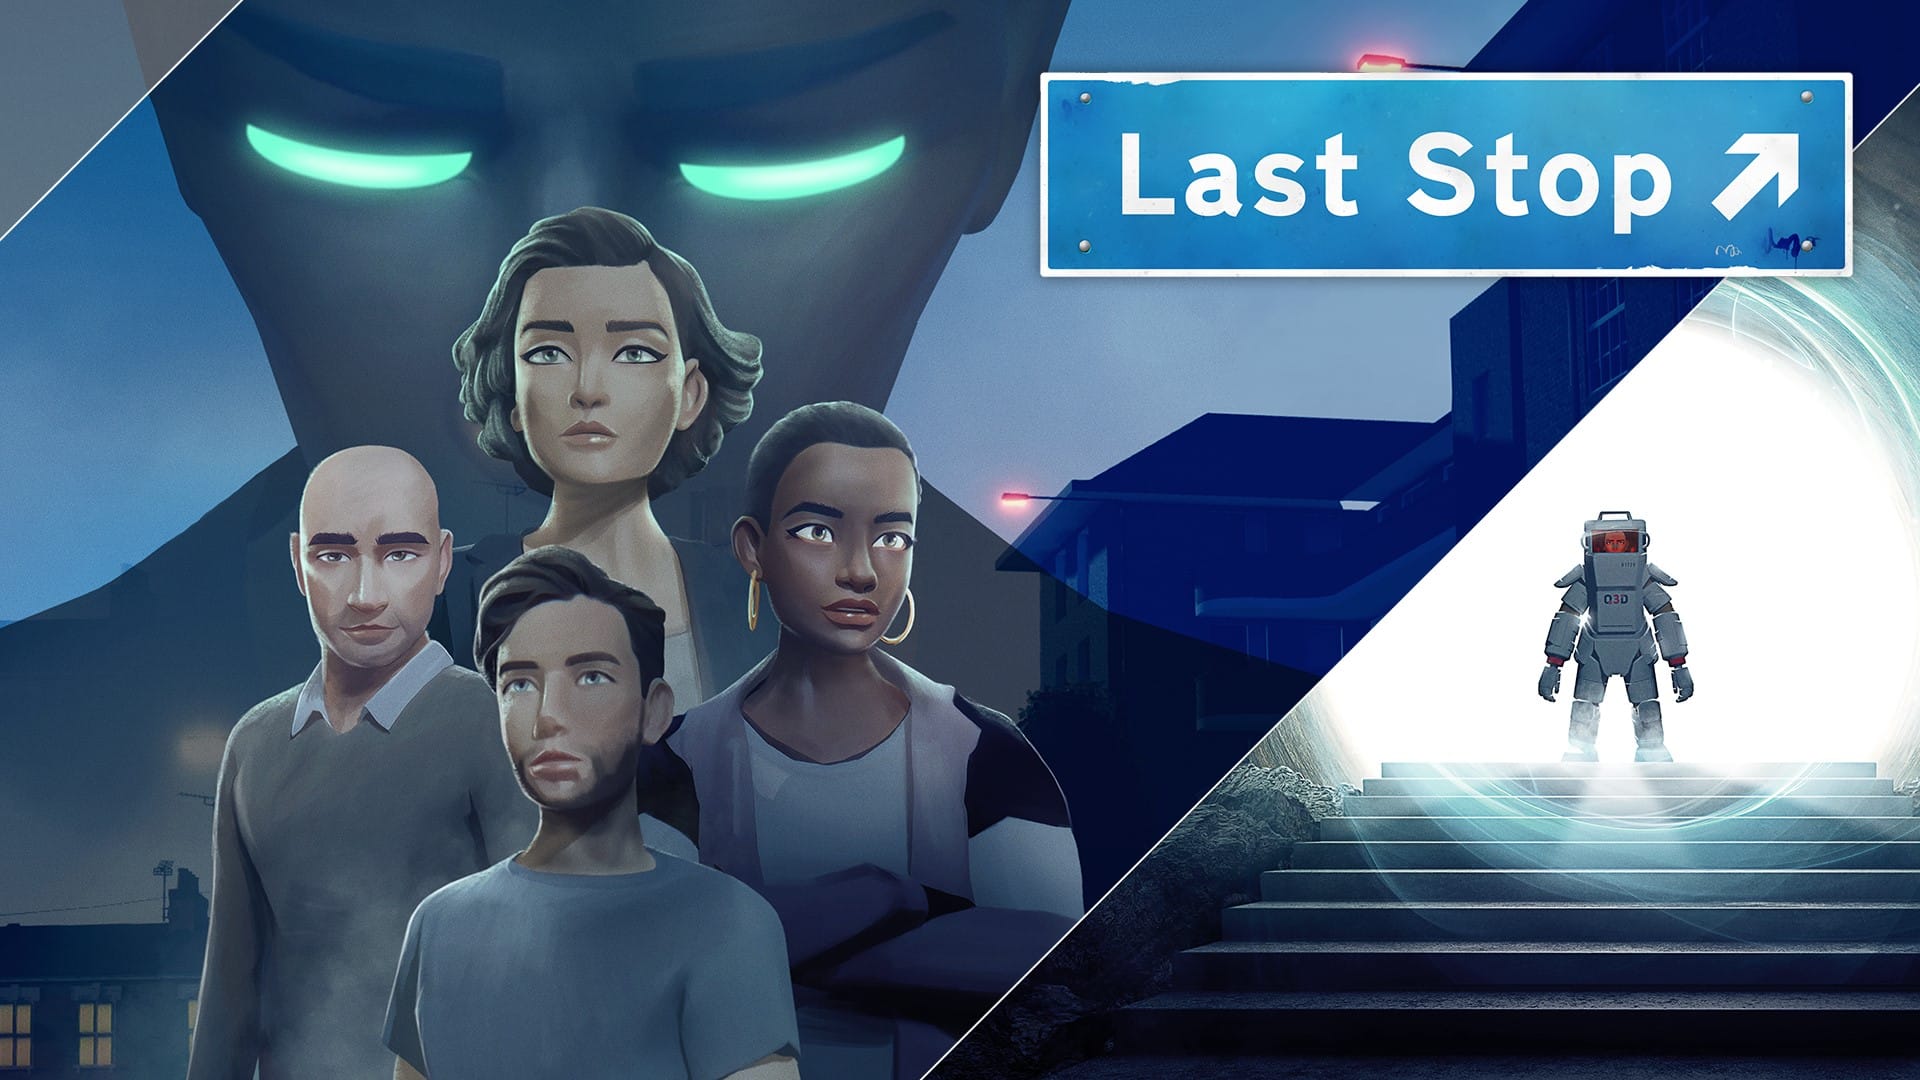 The lead characters of Last Stop, a mysterious figure with glowing eyes and a diving suit seen in the background